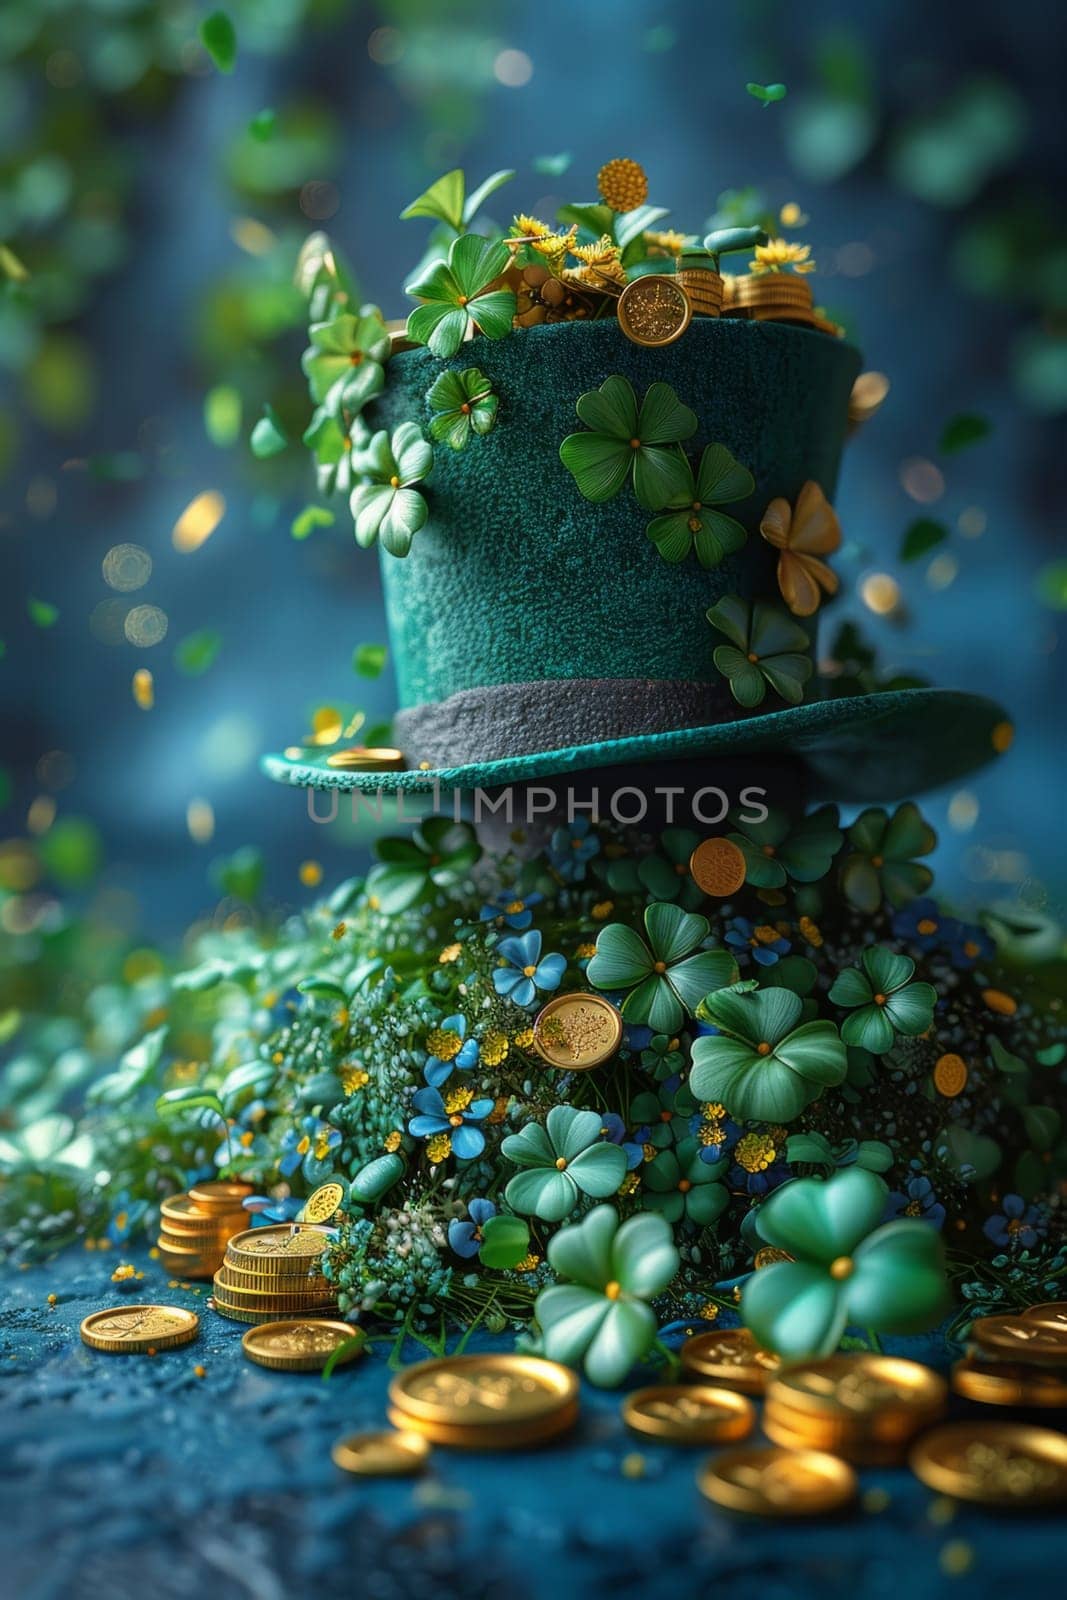 A green Leprechaun hat and gold coins stand out lying on the surface. St. Patrick's Day by Lobachad